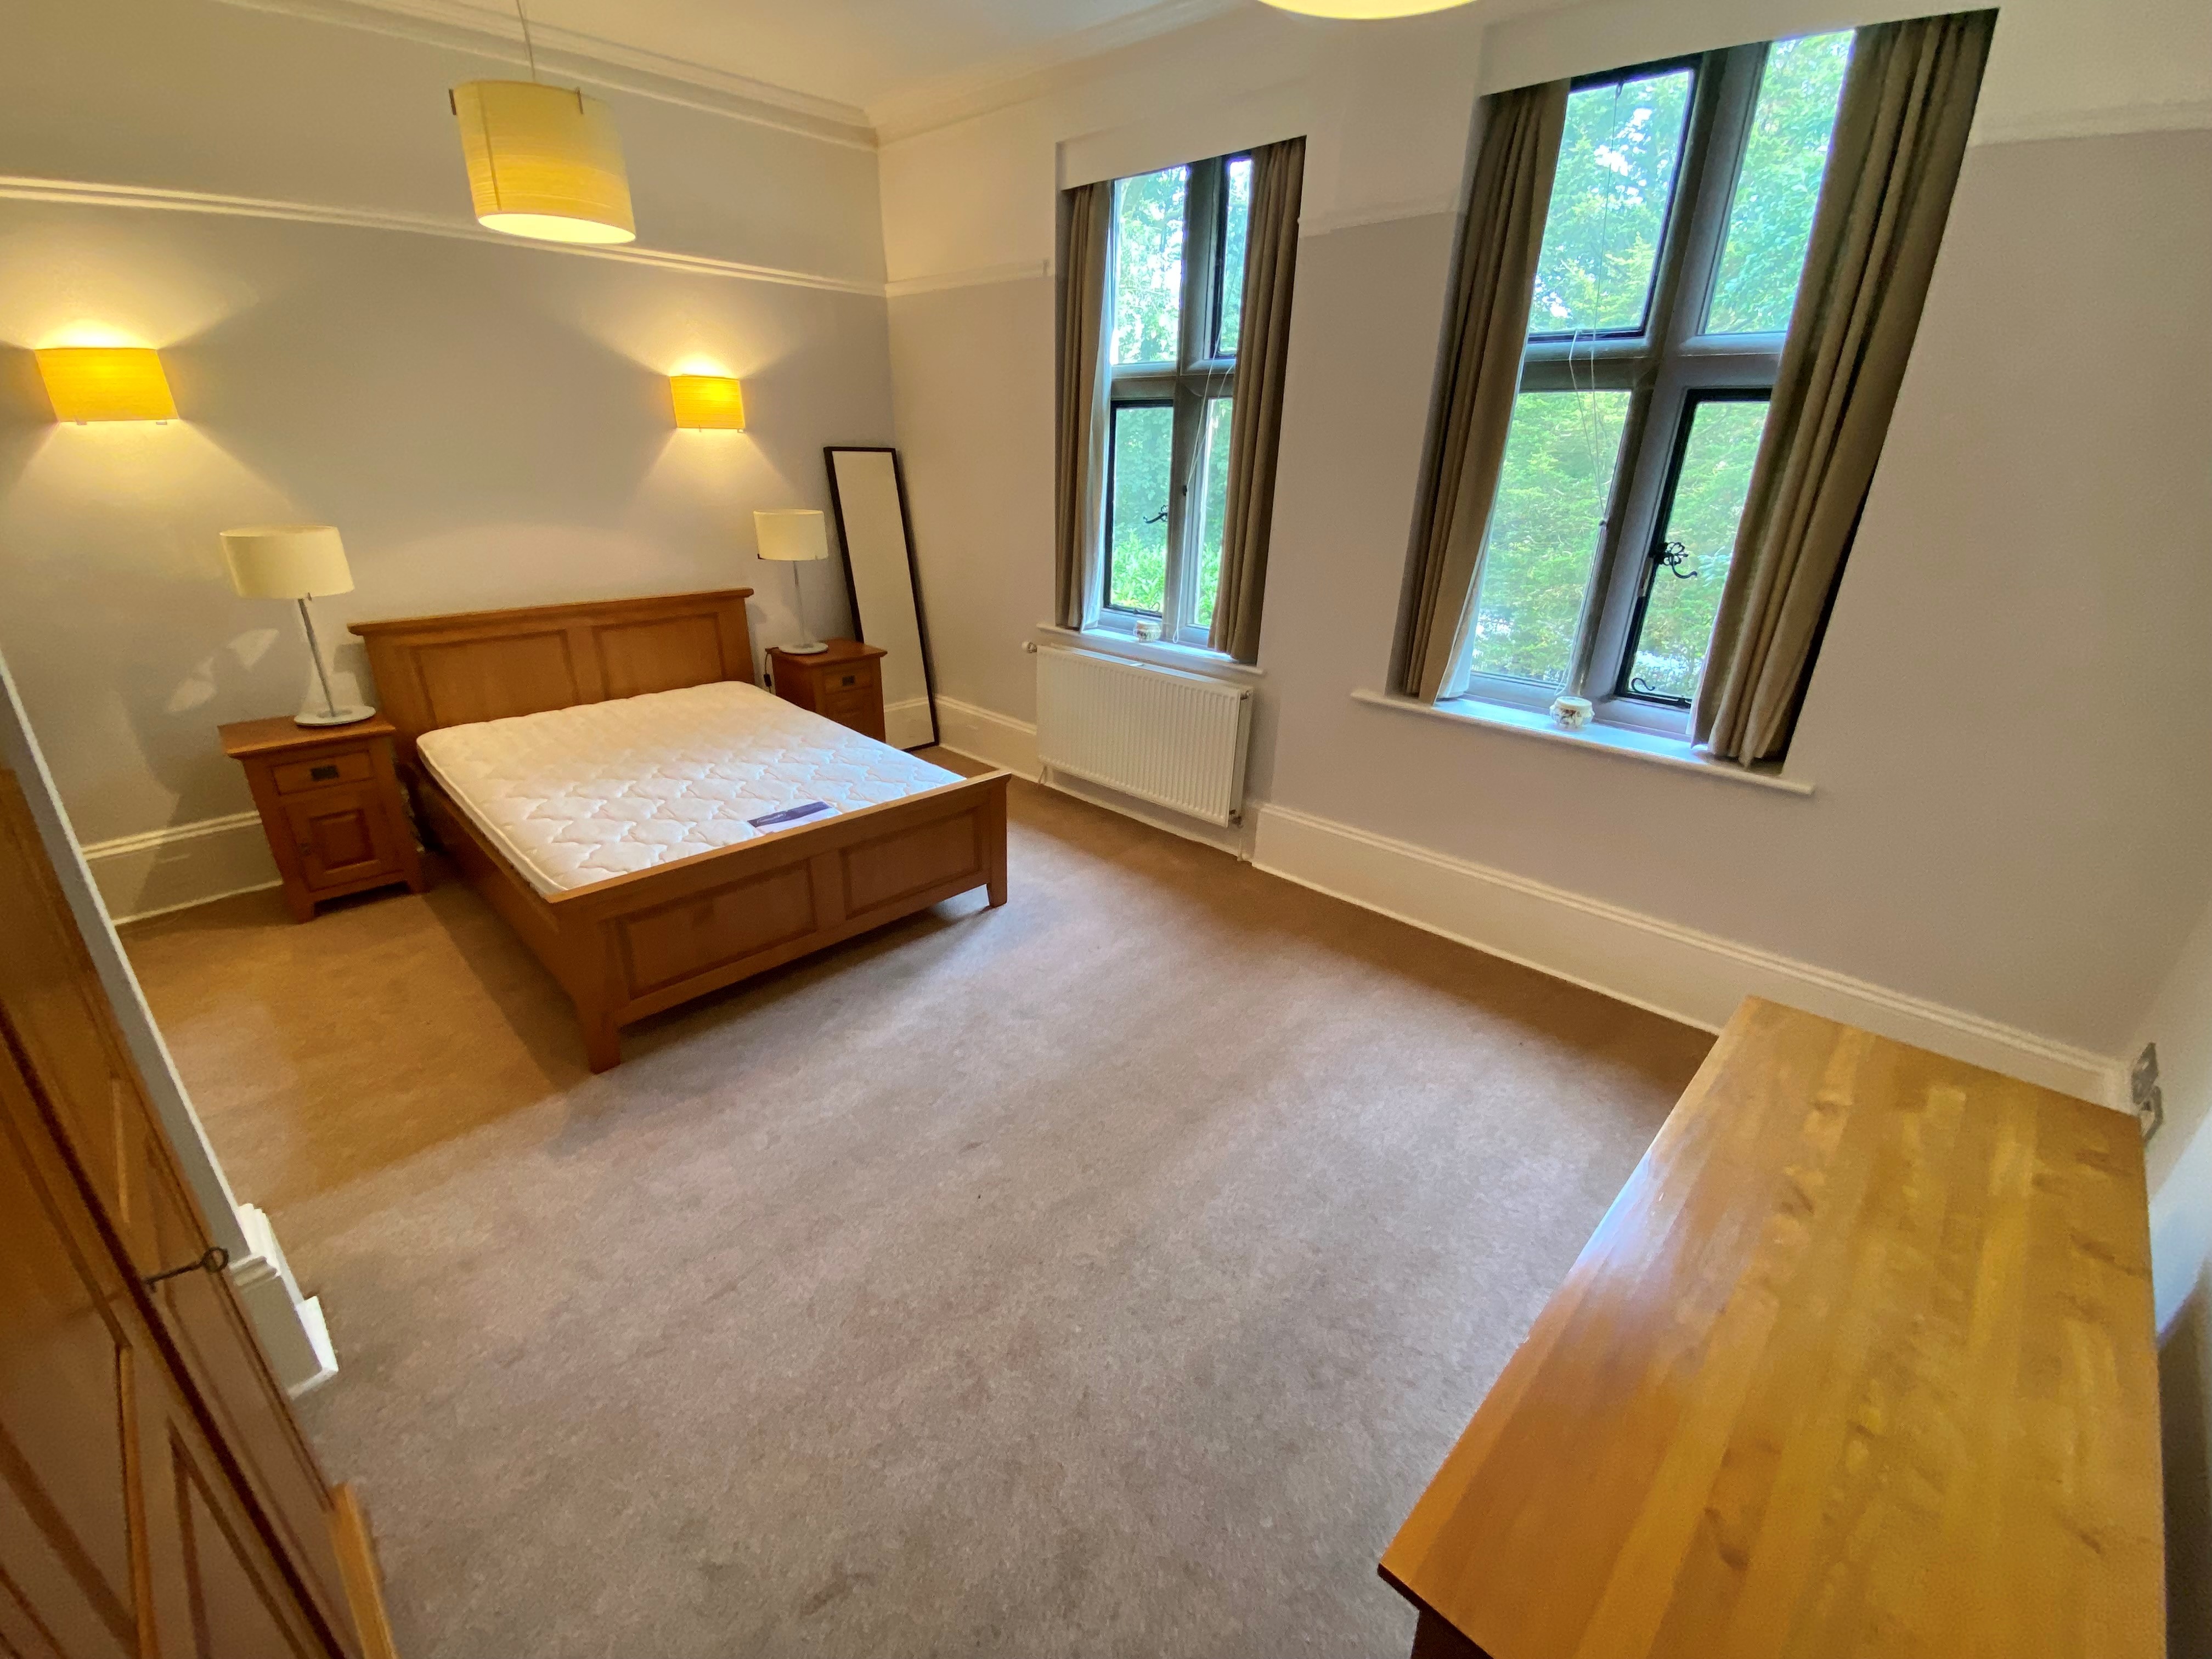 Rooms available in Sefton Park from £500pcm